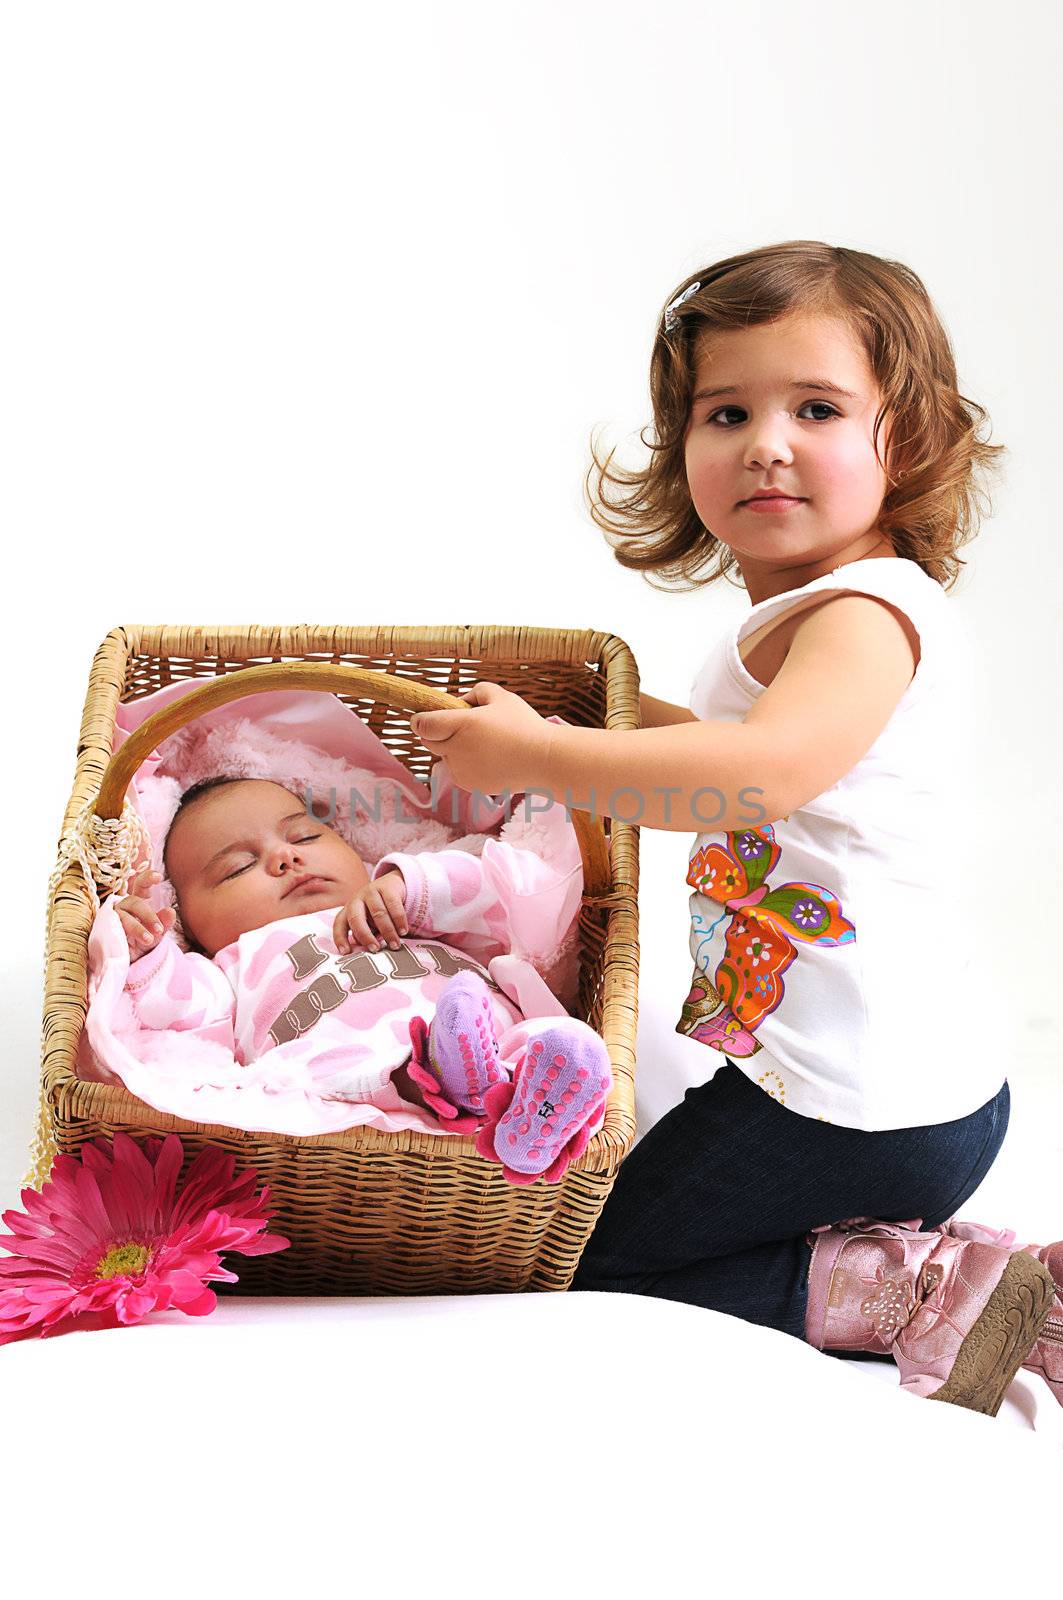 two sisters playing and smiling in a basket by Ansunette